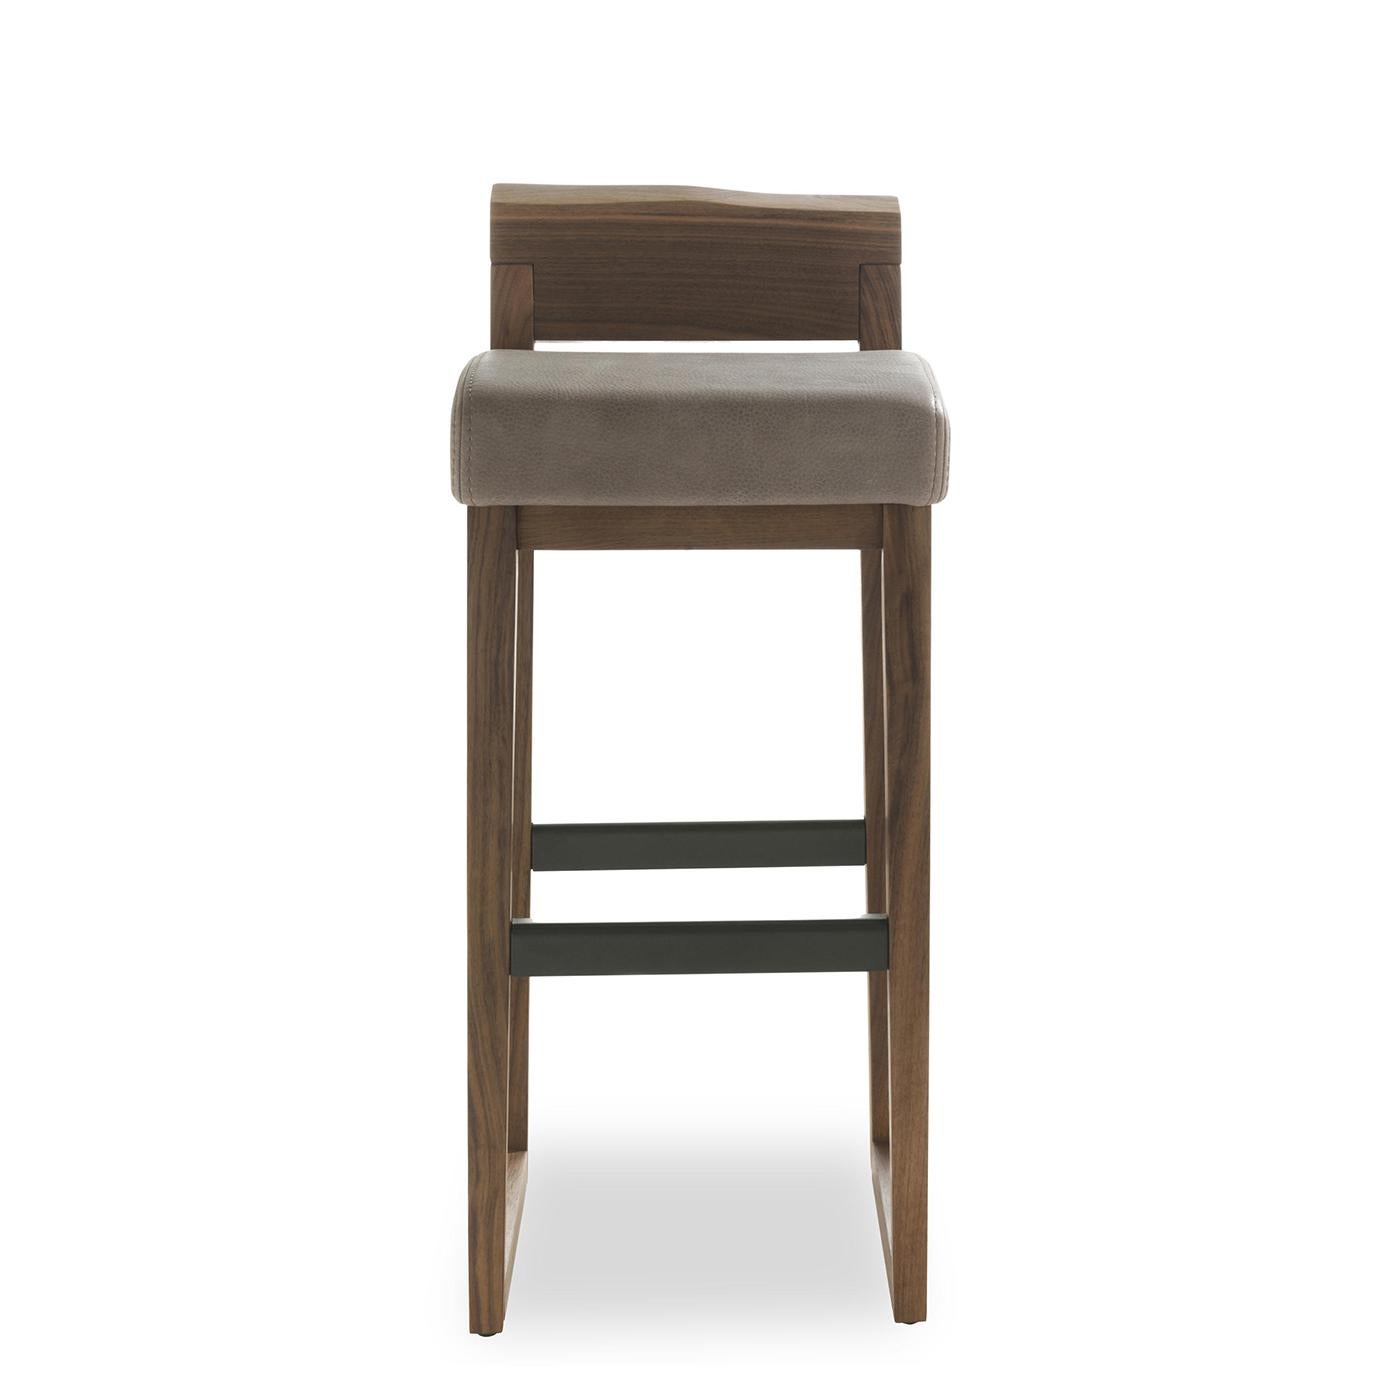 Stool Norman with solid walnut wood structure,
handcrafted wood treated with wax with natural
pine extracts. With upholstered seat covered with
high quality Italian genuine leather D3 with
exposed stitching. With raw iron footrest lacquered
in iron